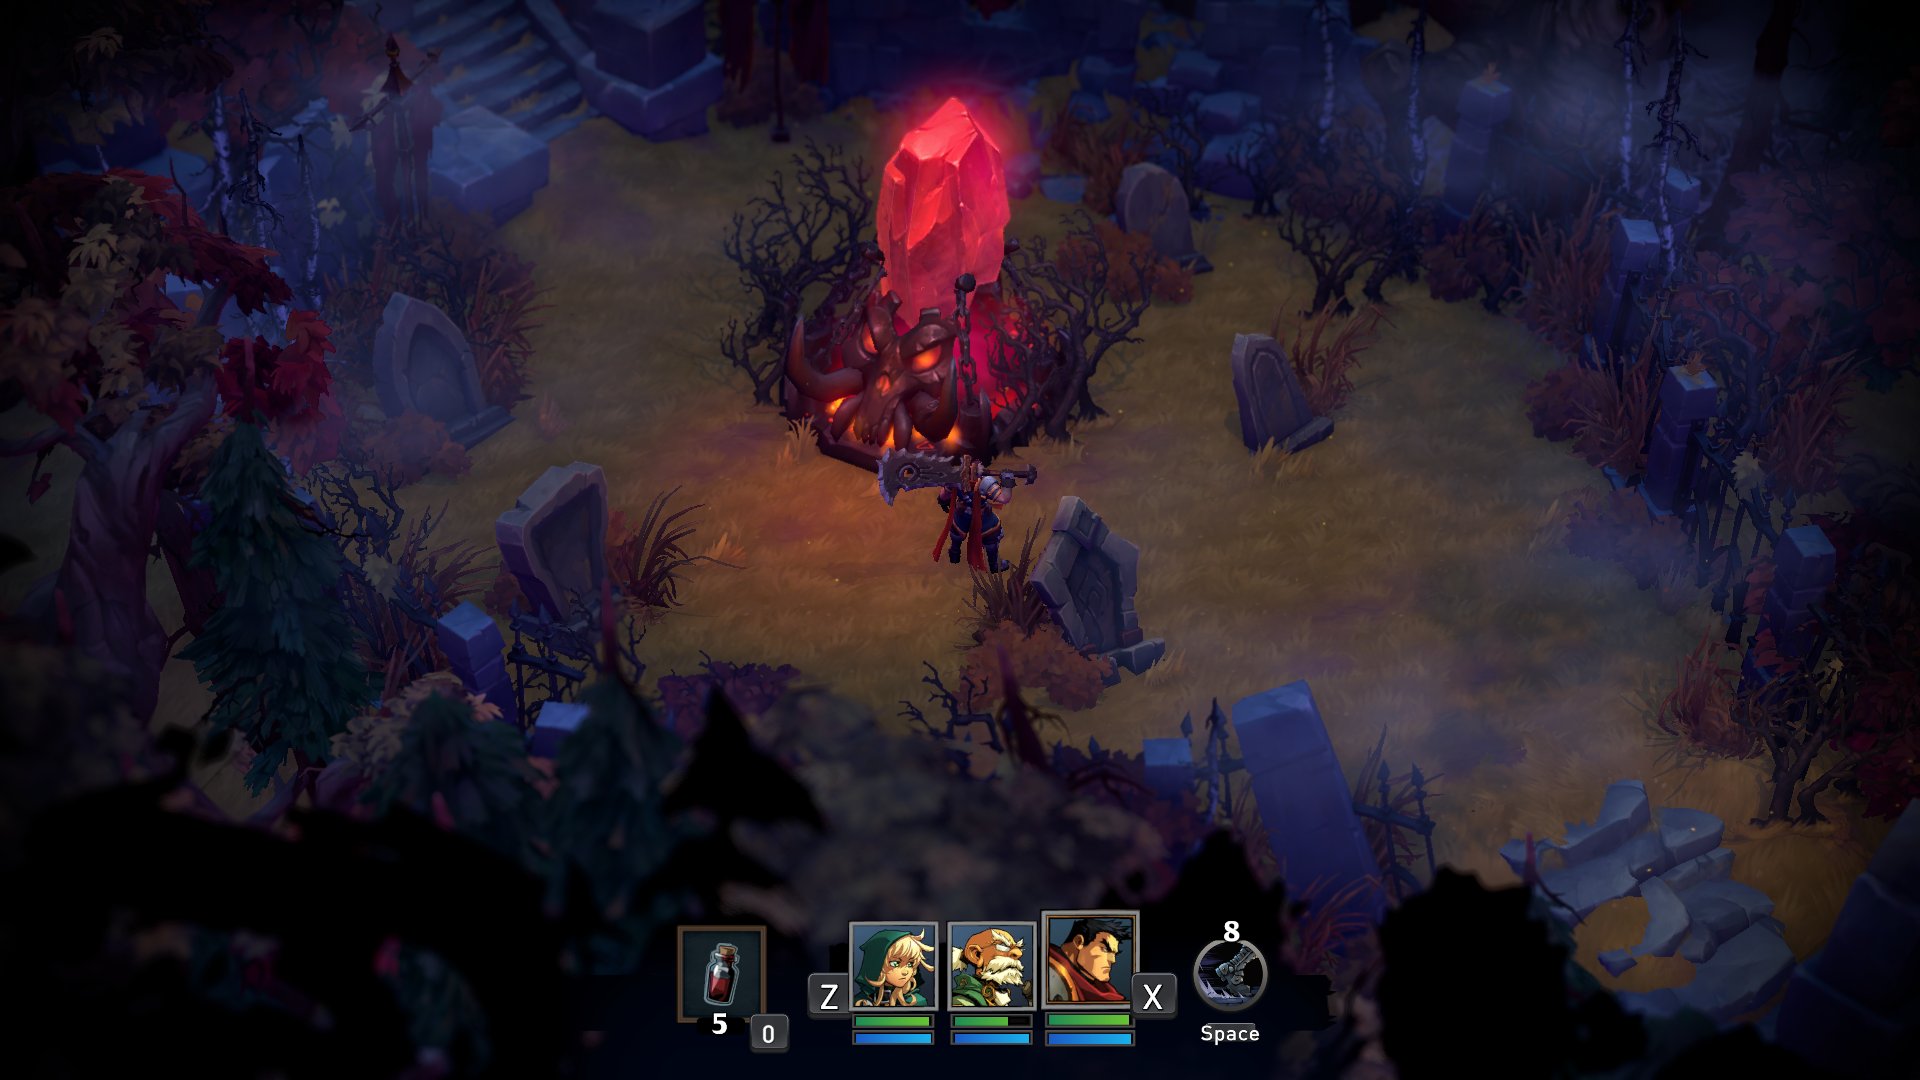 Party-Based Dungeon Crawler Battle Chasers: Nightwar Available Now on Xbox One